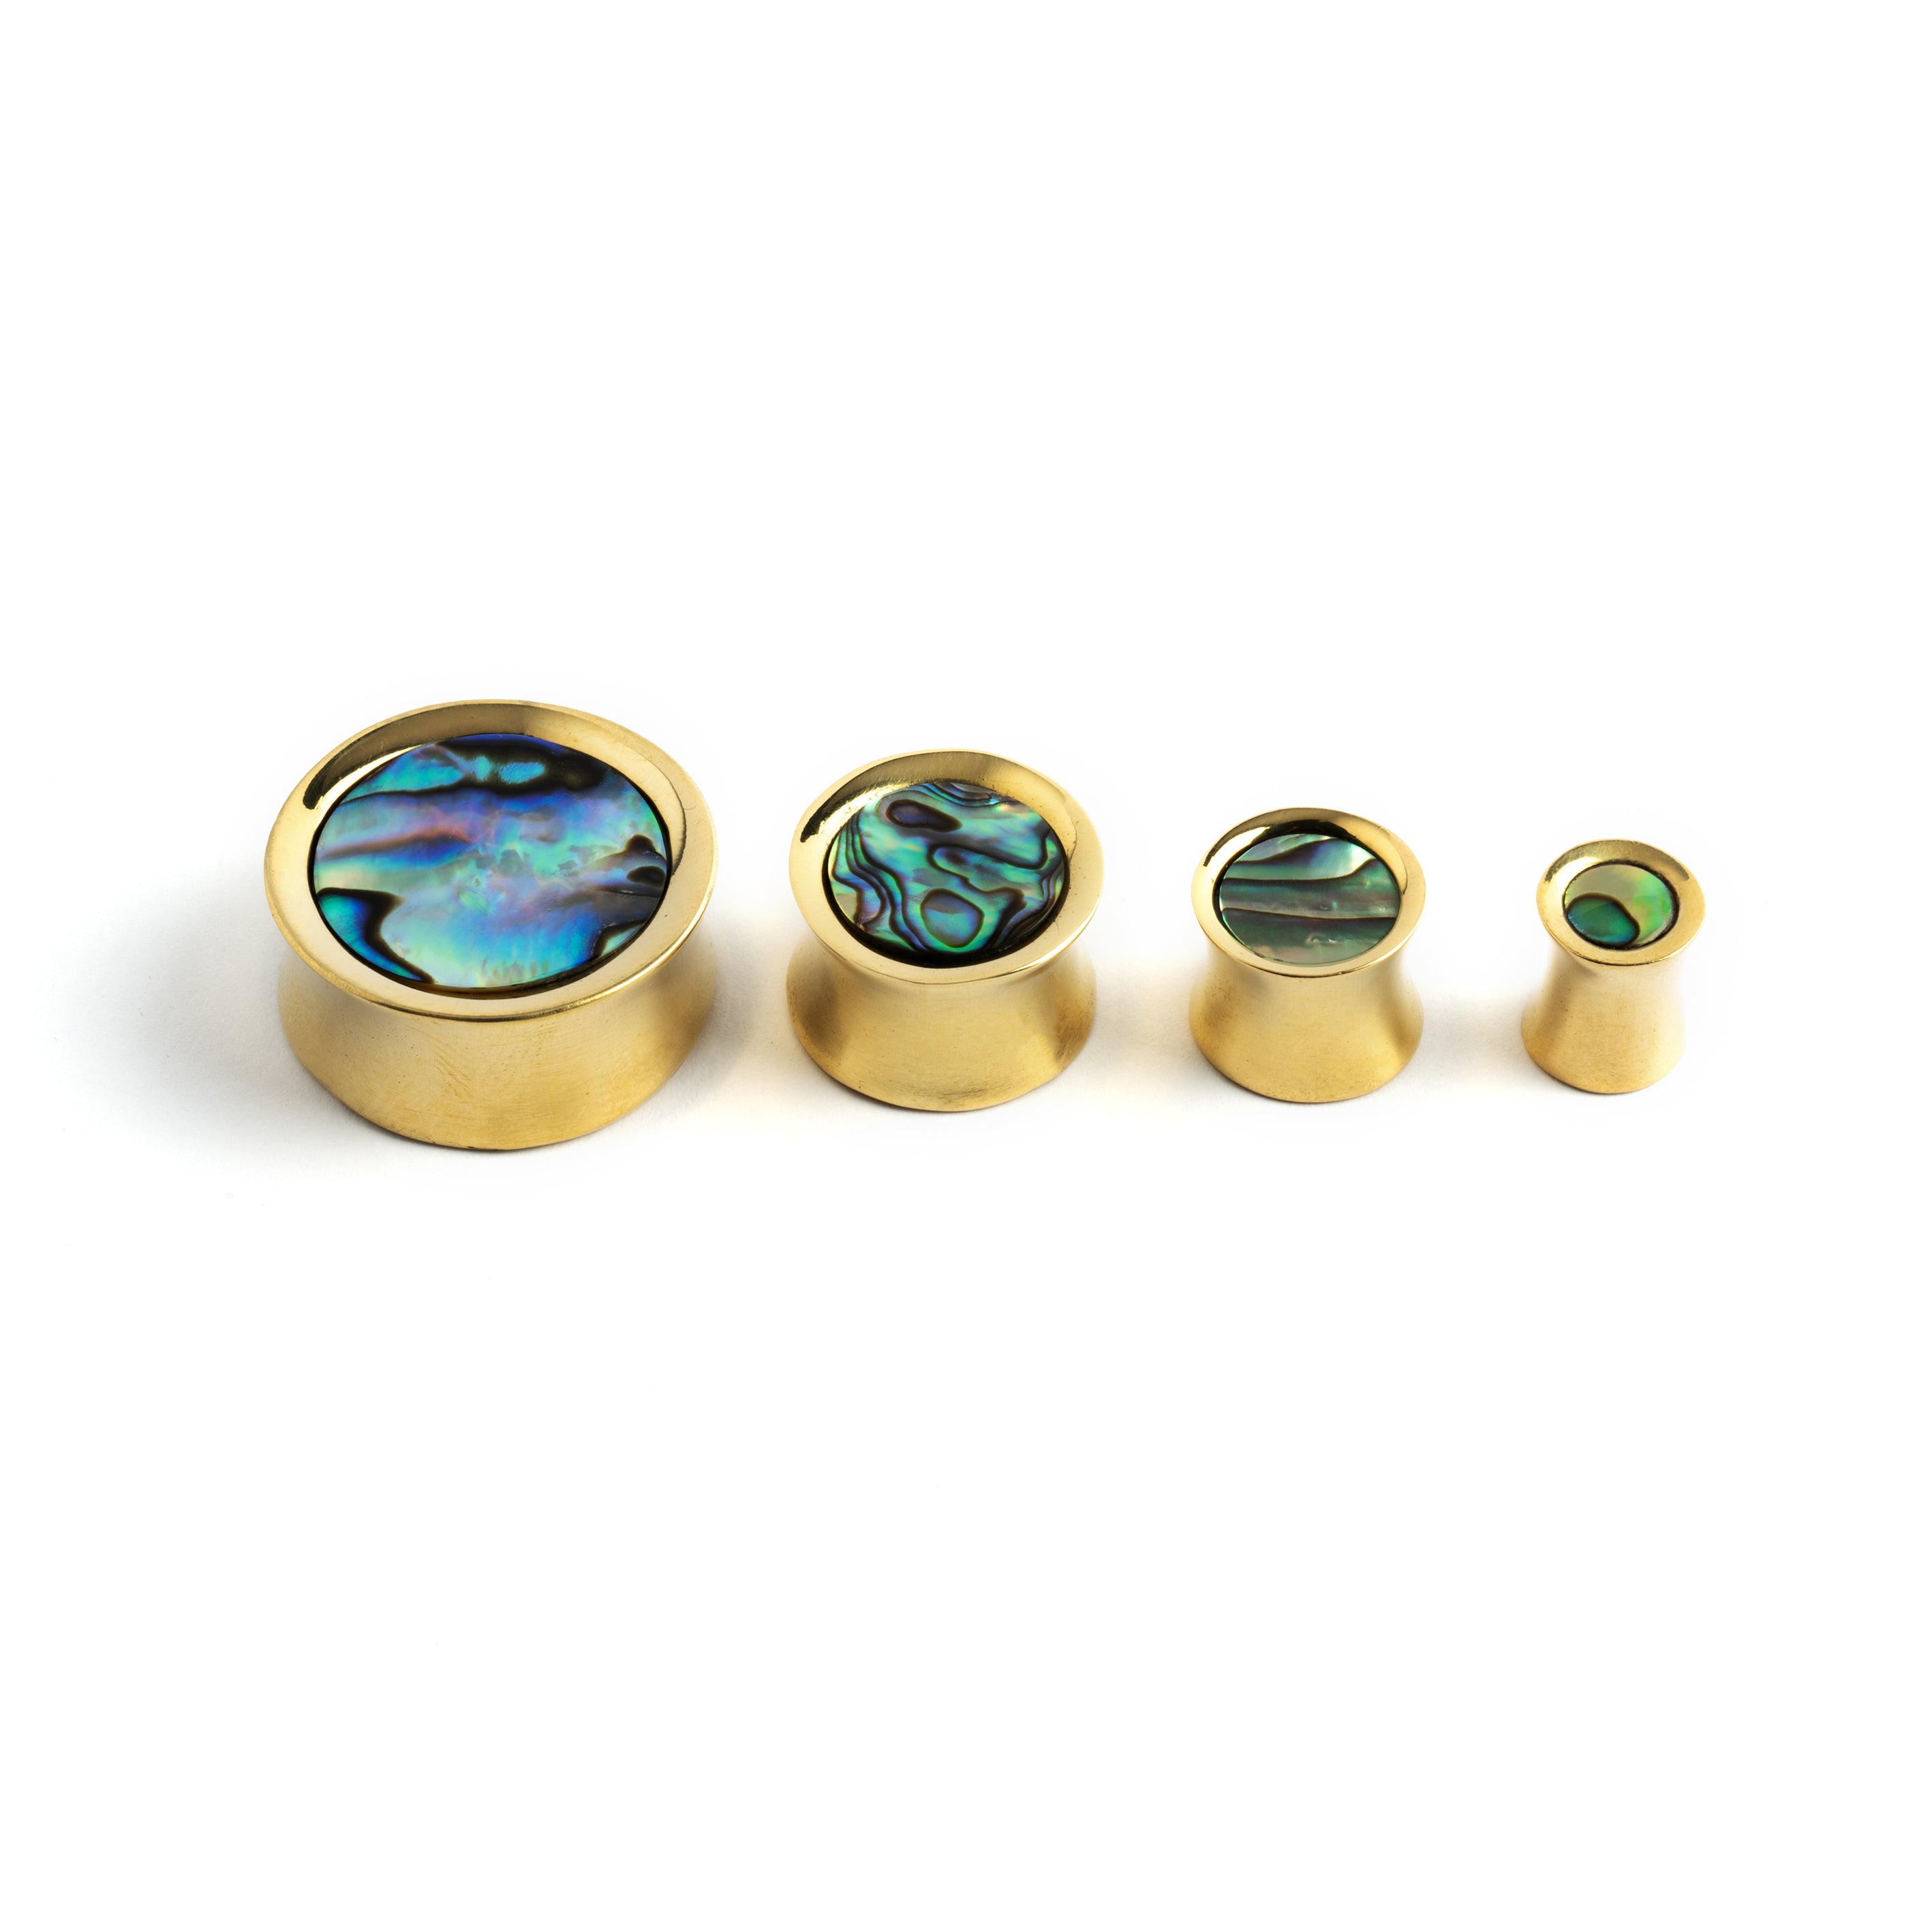 several sizes of golden brass ear plugs with abalone inlay front side view